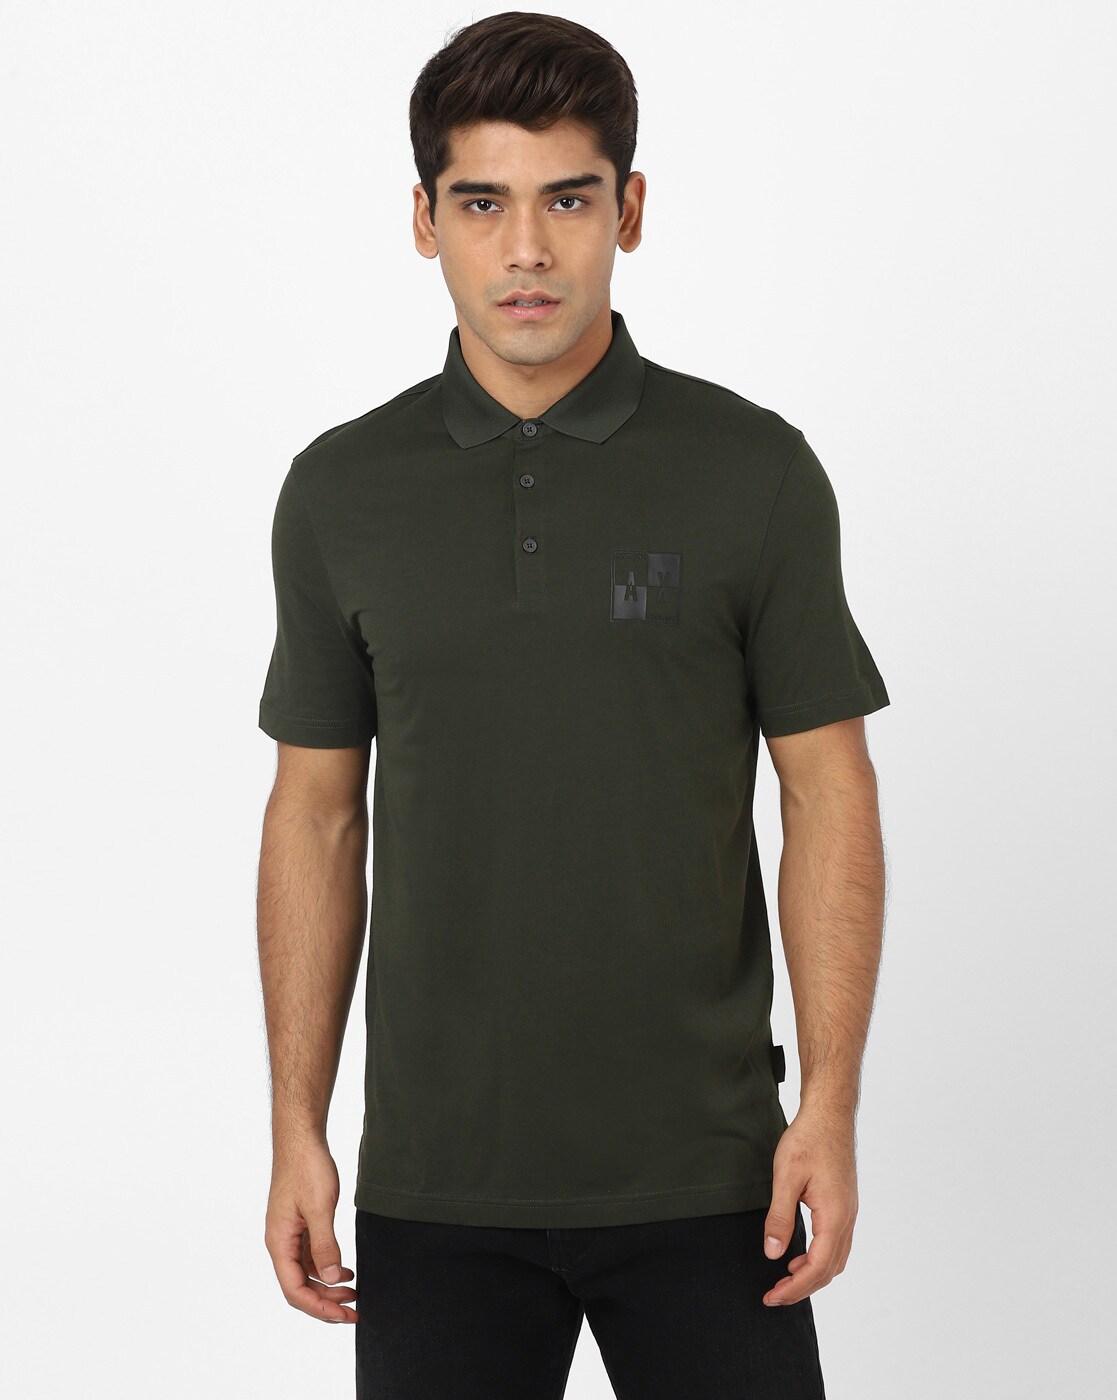 Buy Green Tshirts for Men by ARMANI EXCHANGE Online 